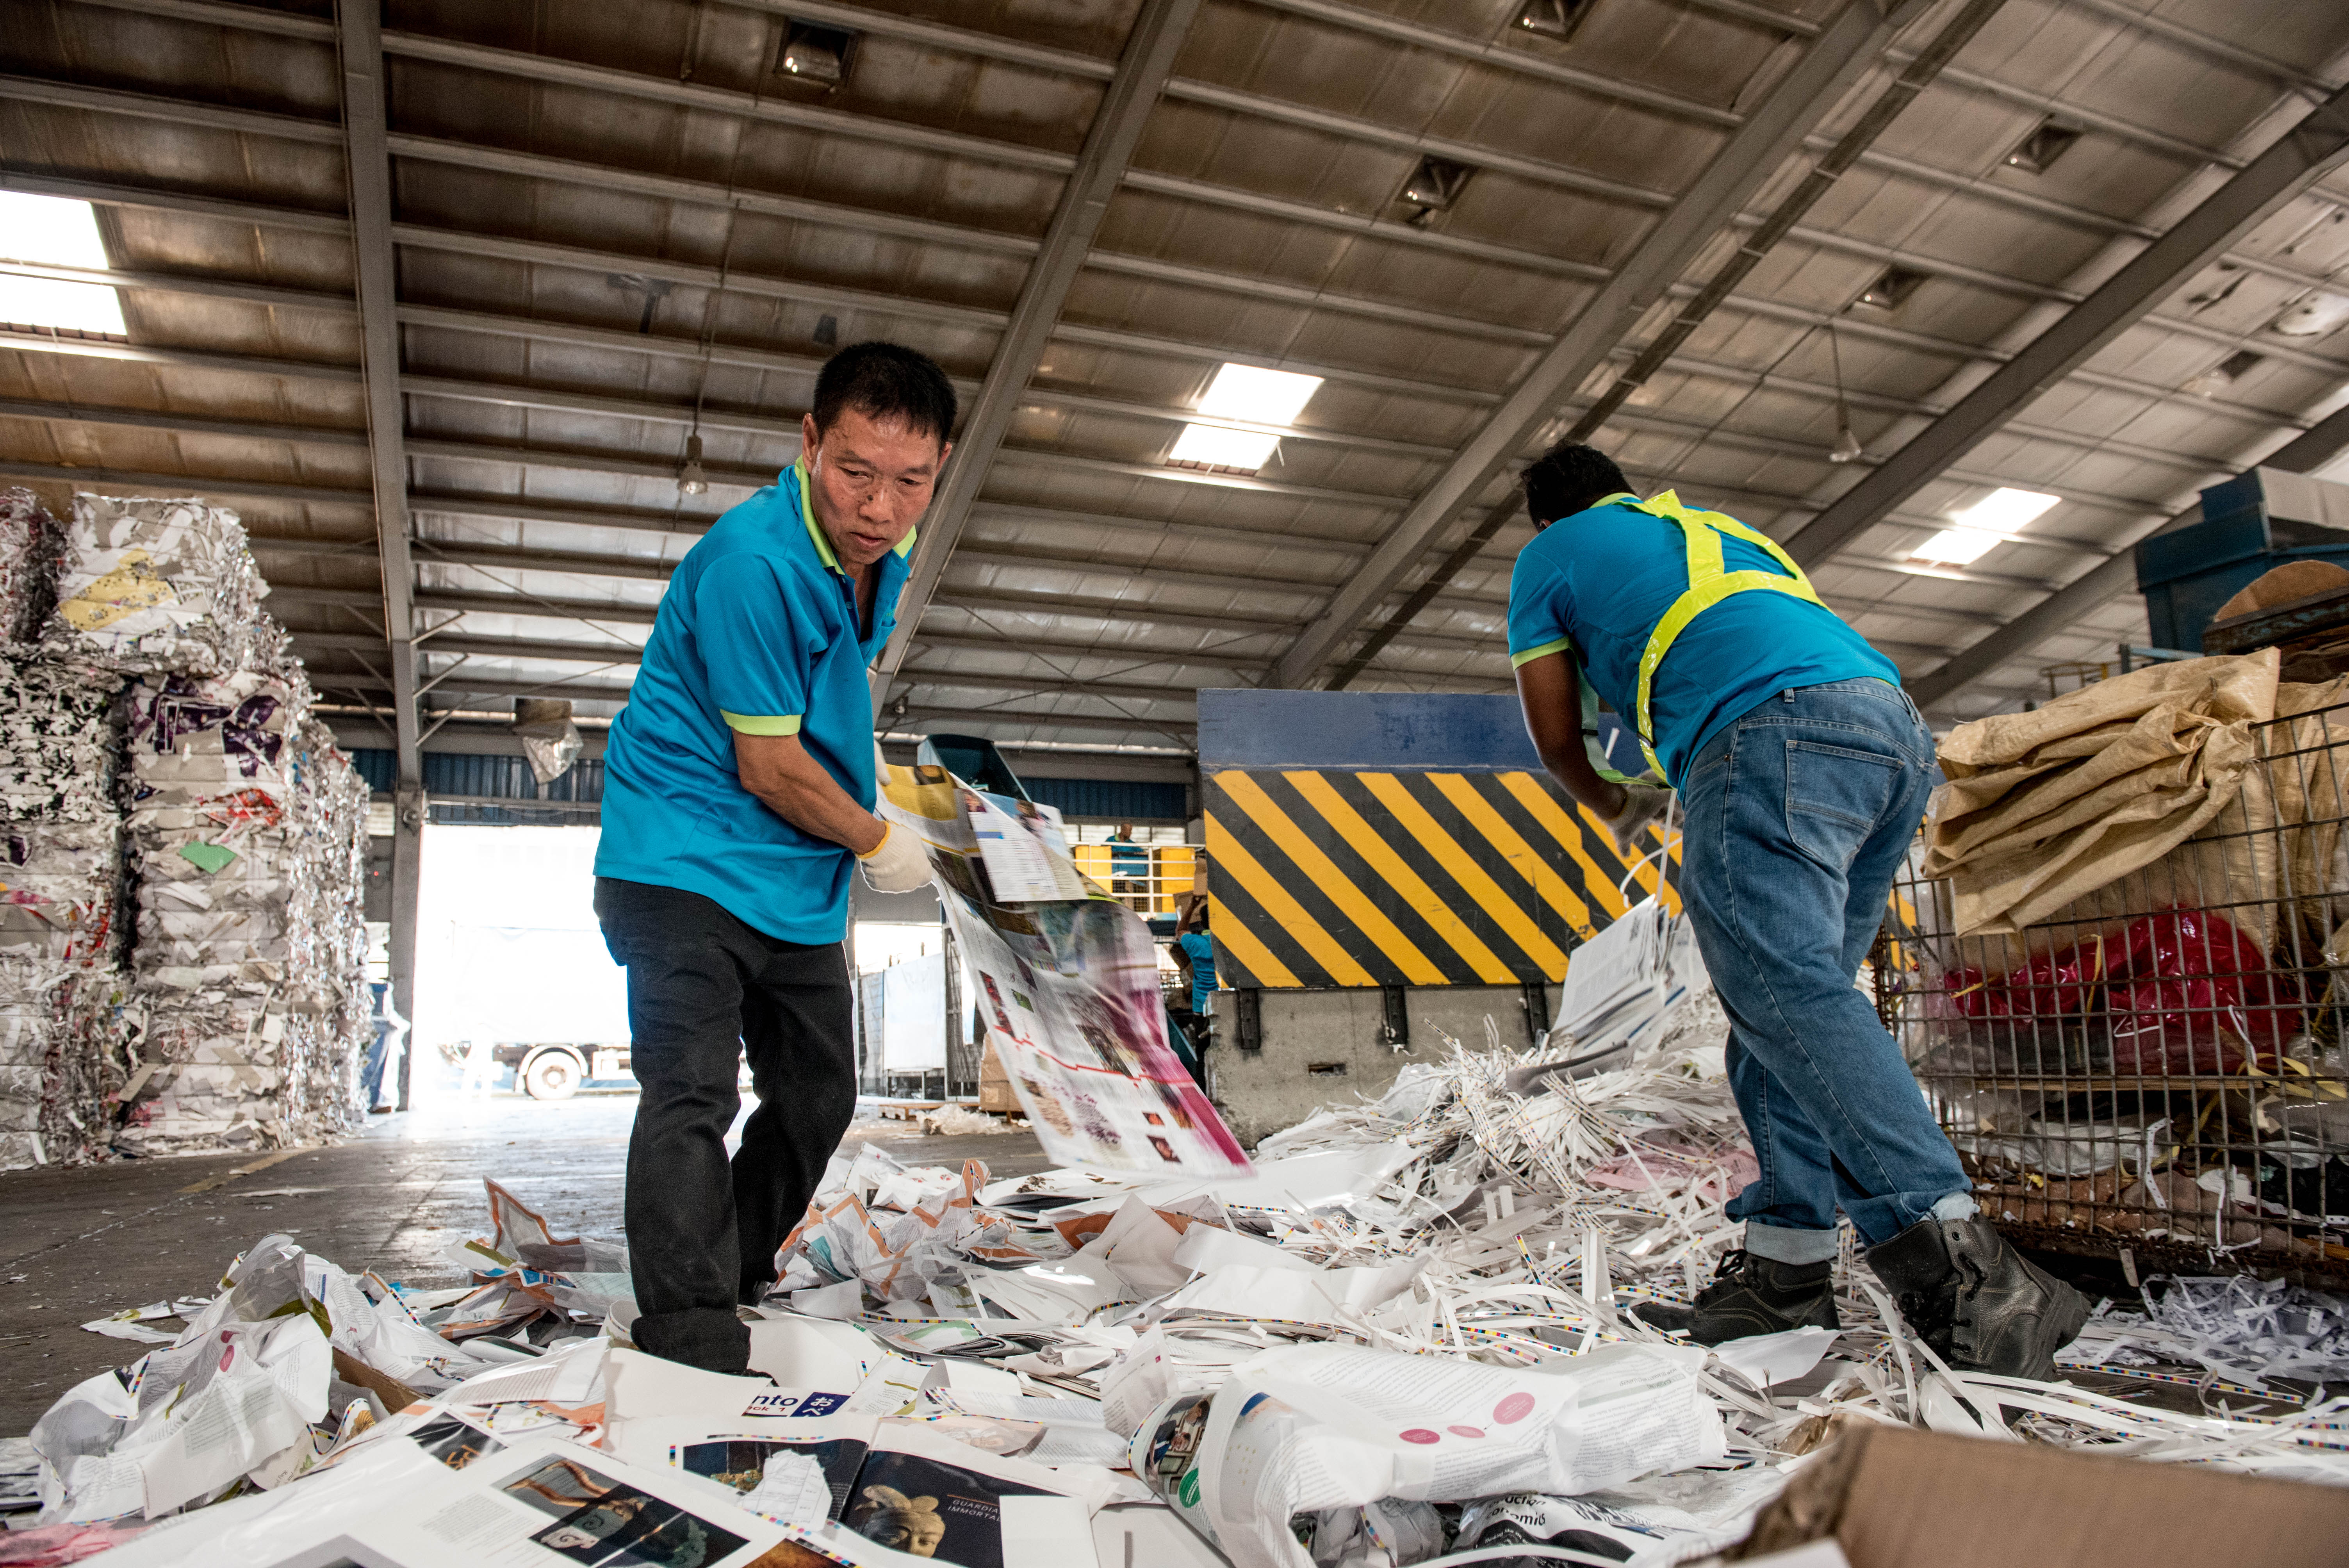 Sparking Change: Recycling For a Sustainable Future